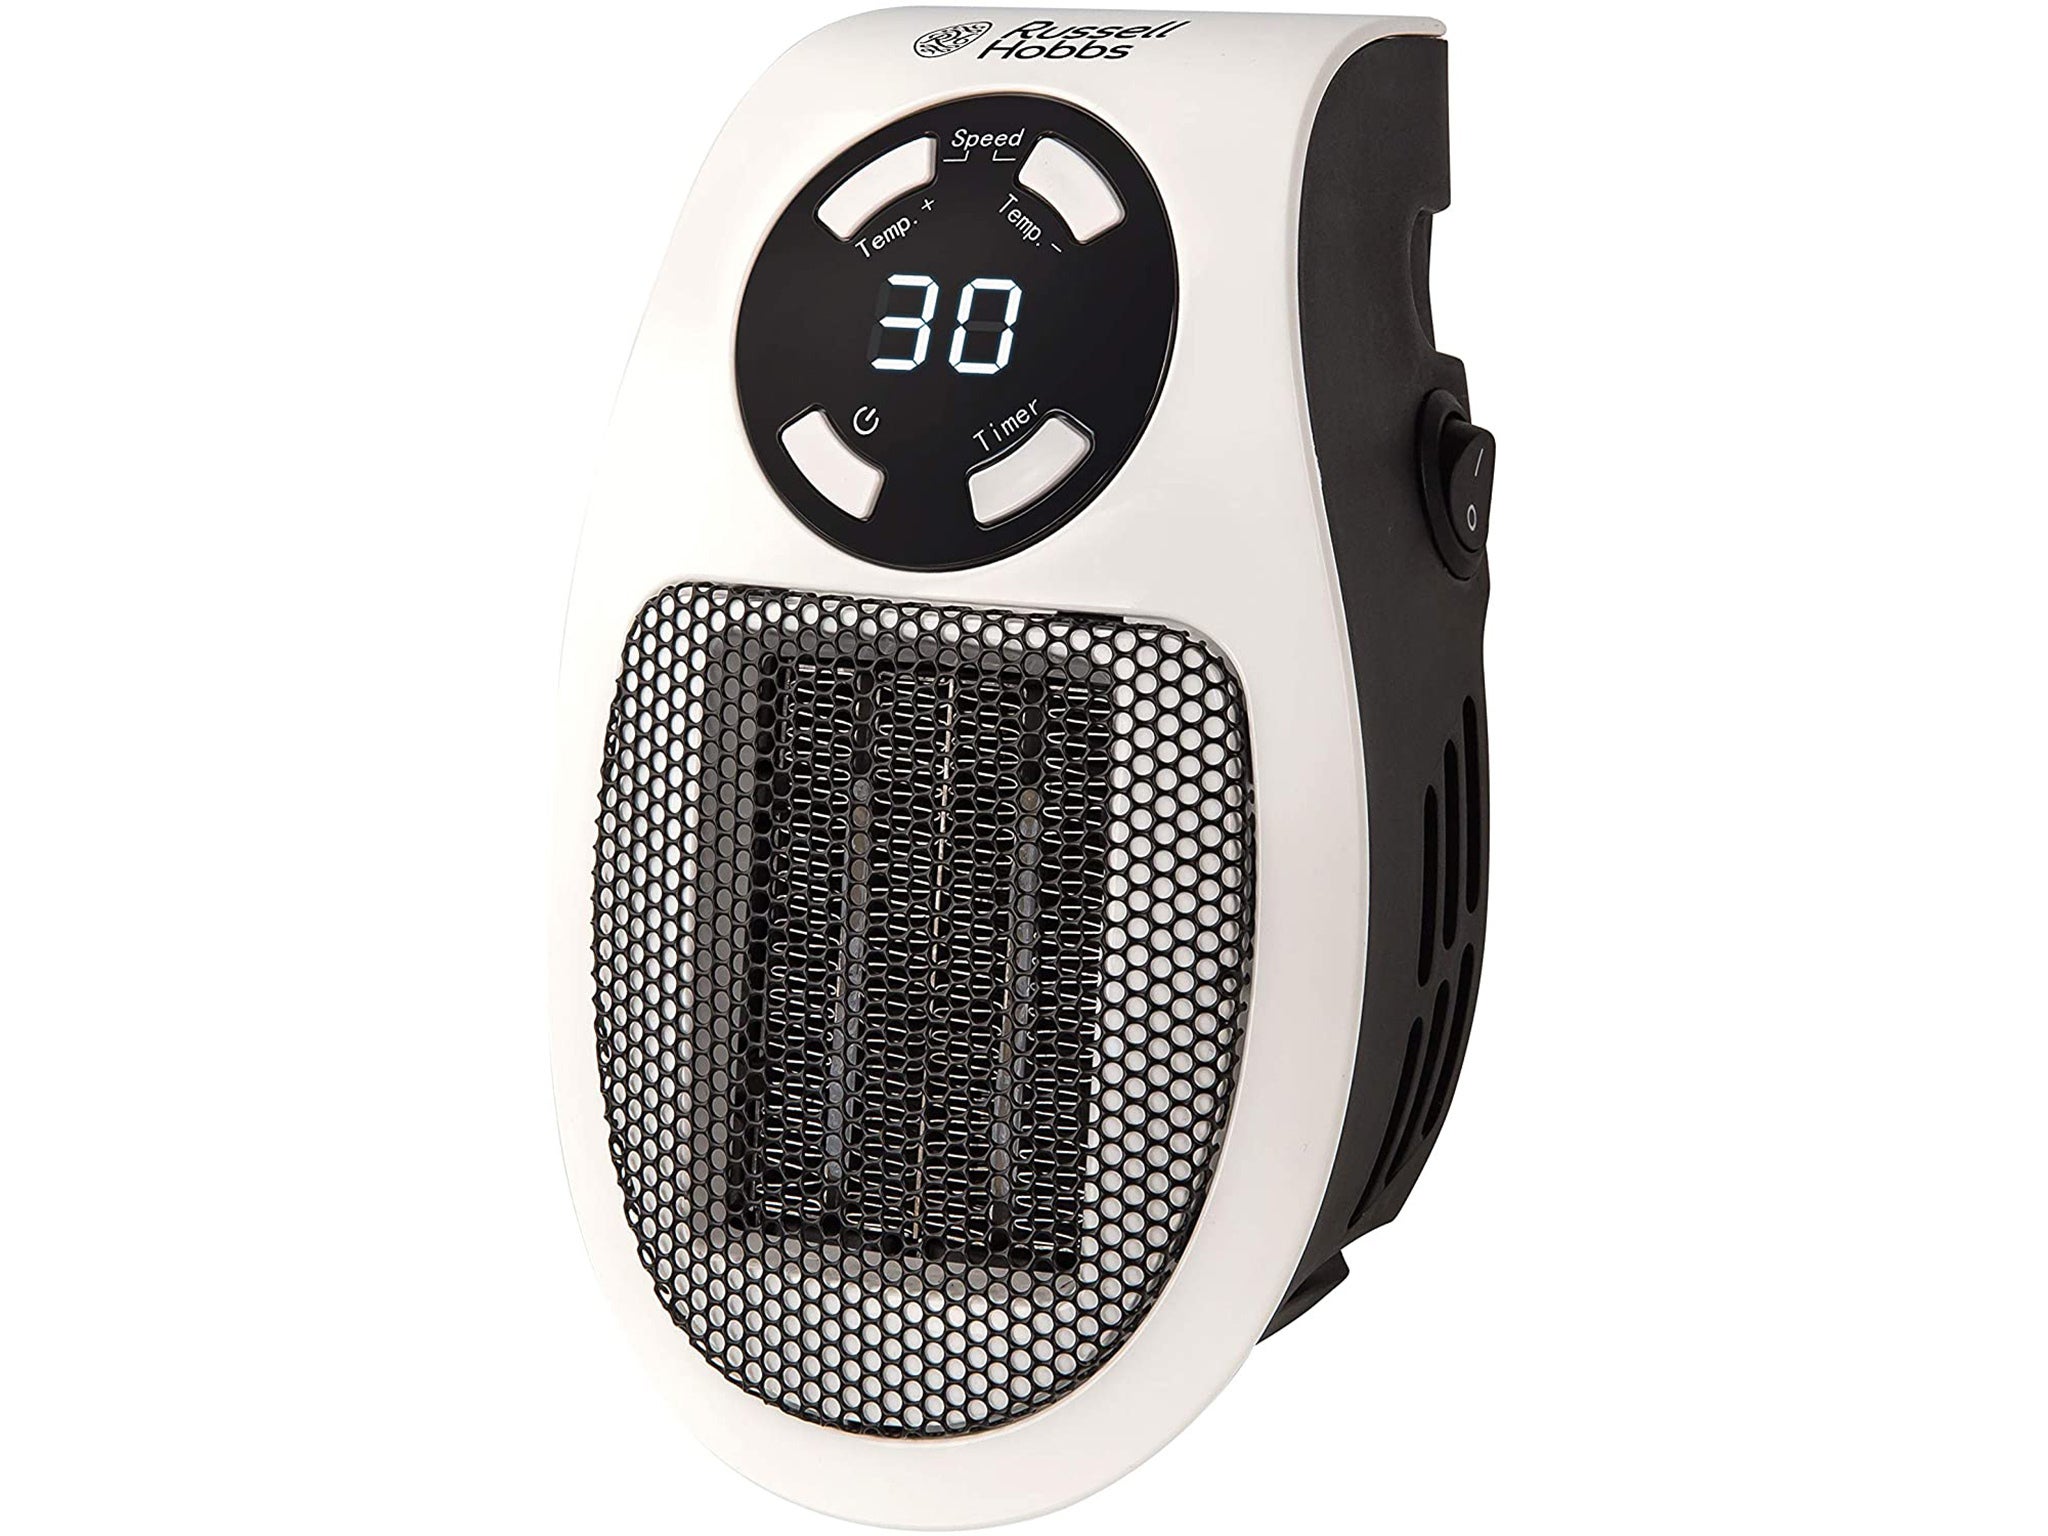 Best electric heaters for beating the cold weather